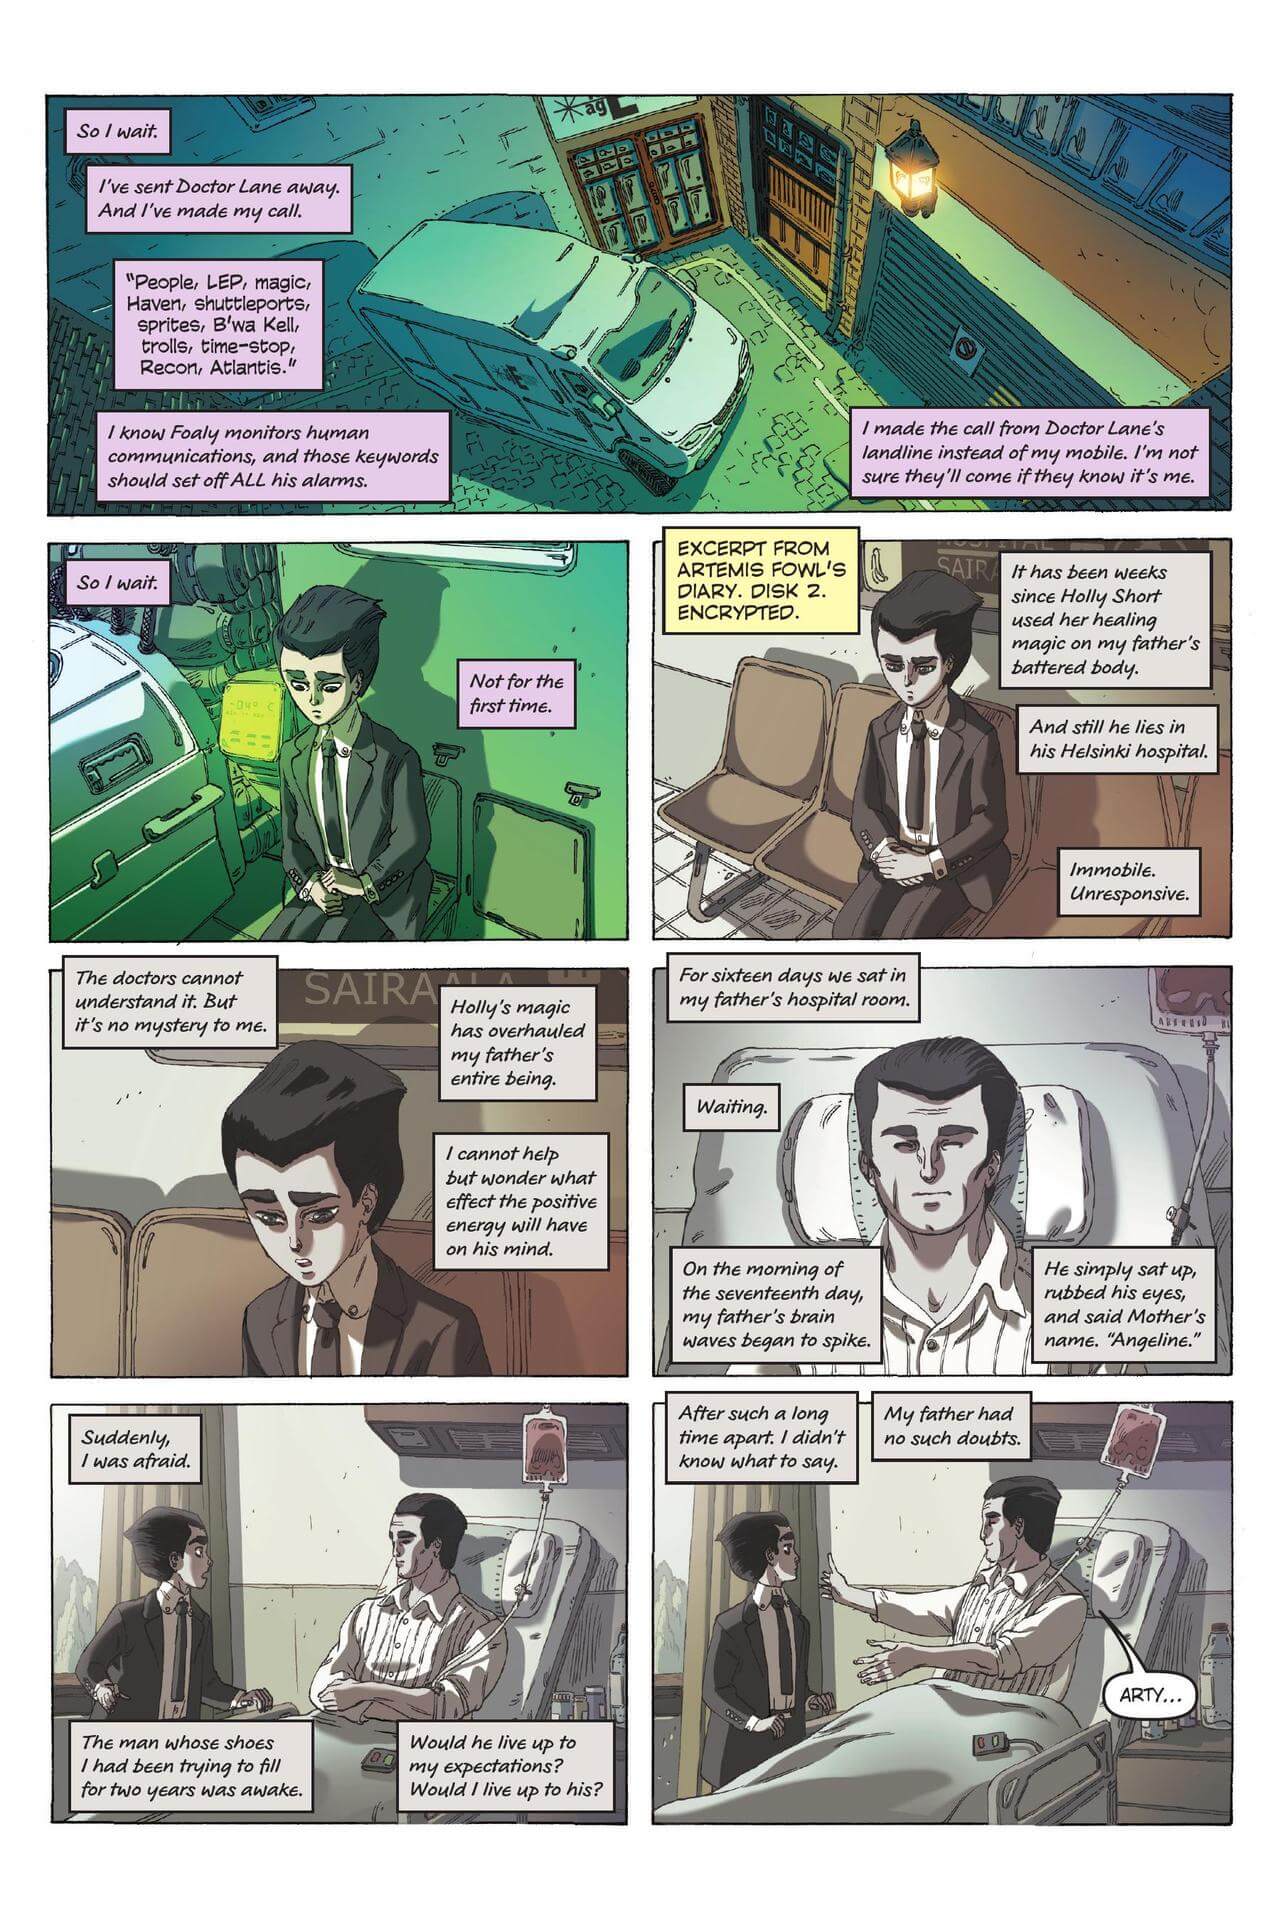 page 31 of artemis fowl eternity code graphic novel